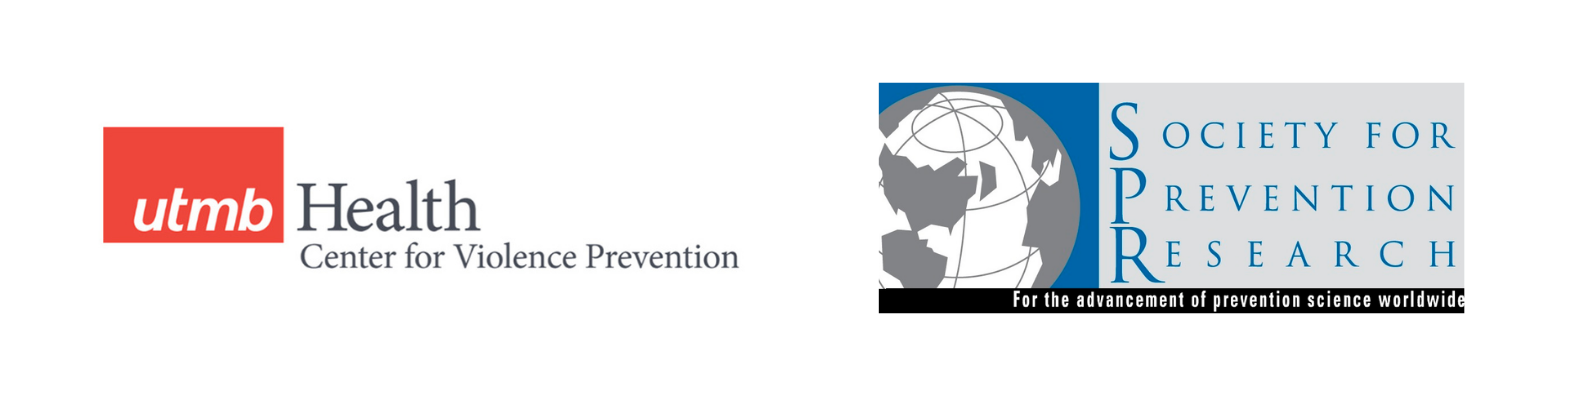 Society for Prevention Research Logo with the Center for Violence Prevention logo